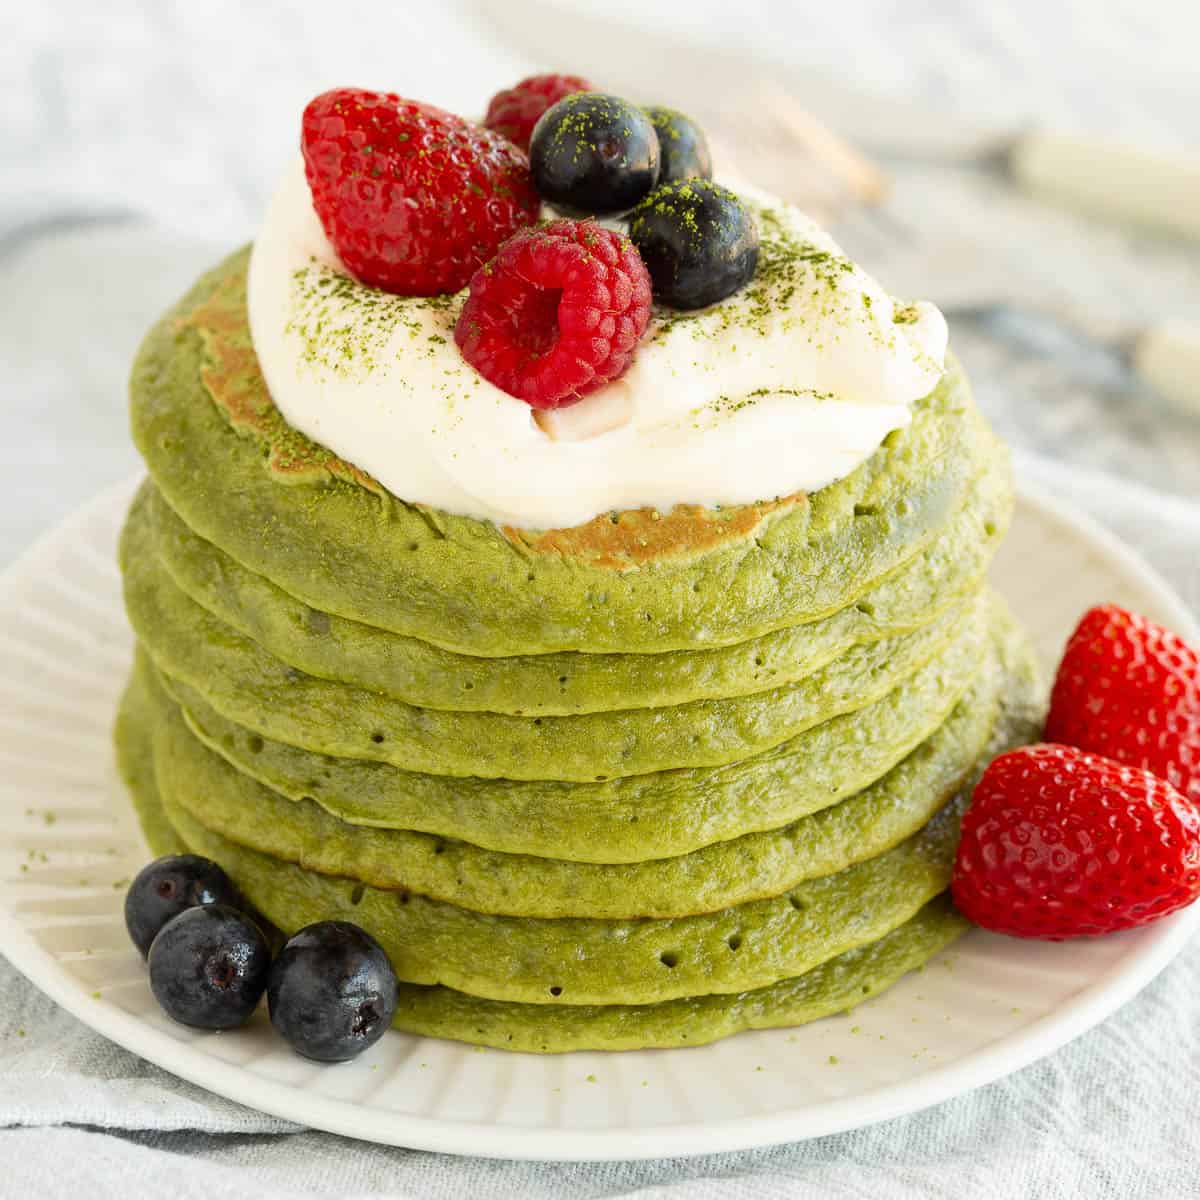 A bright green stack of matcha pancakes with berries and yoghurt on top.